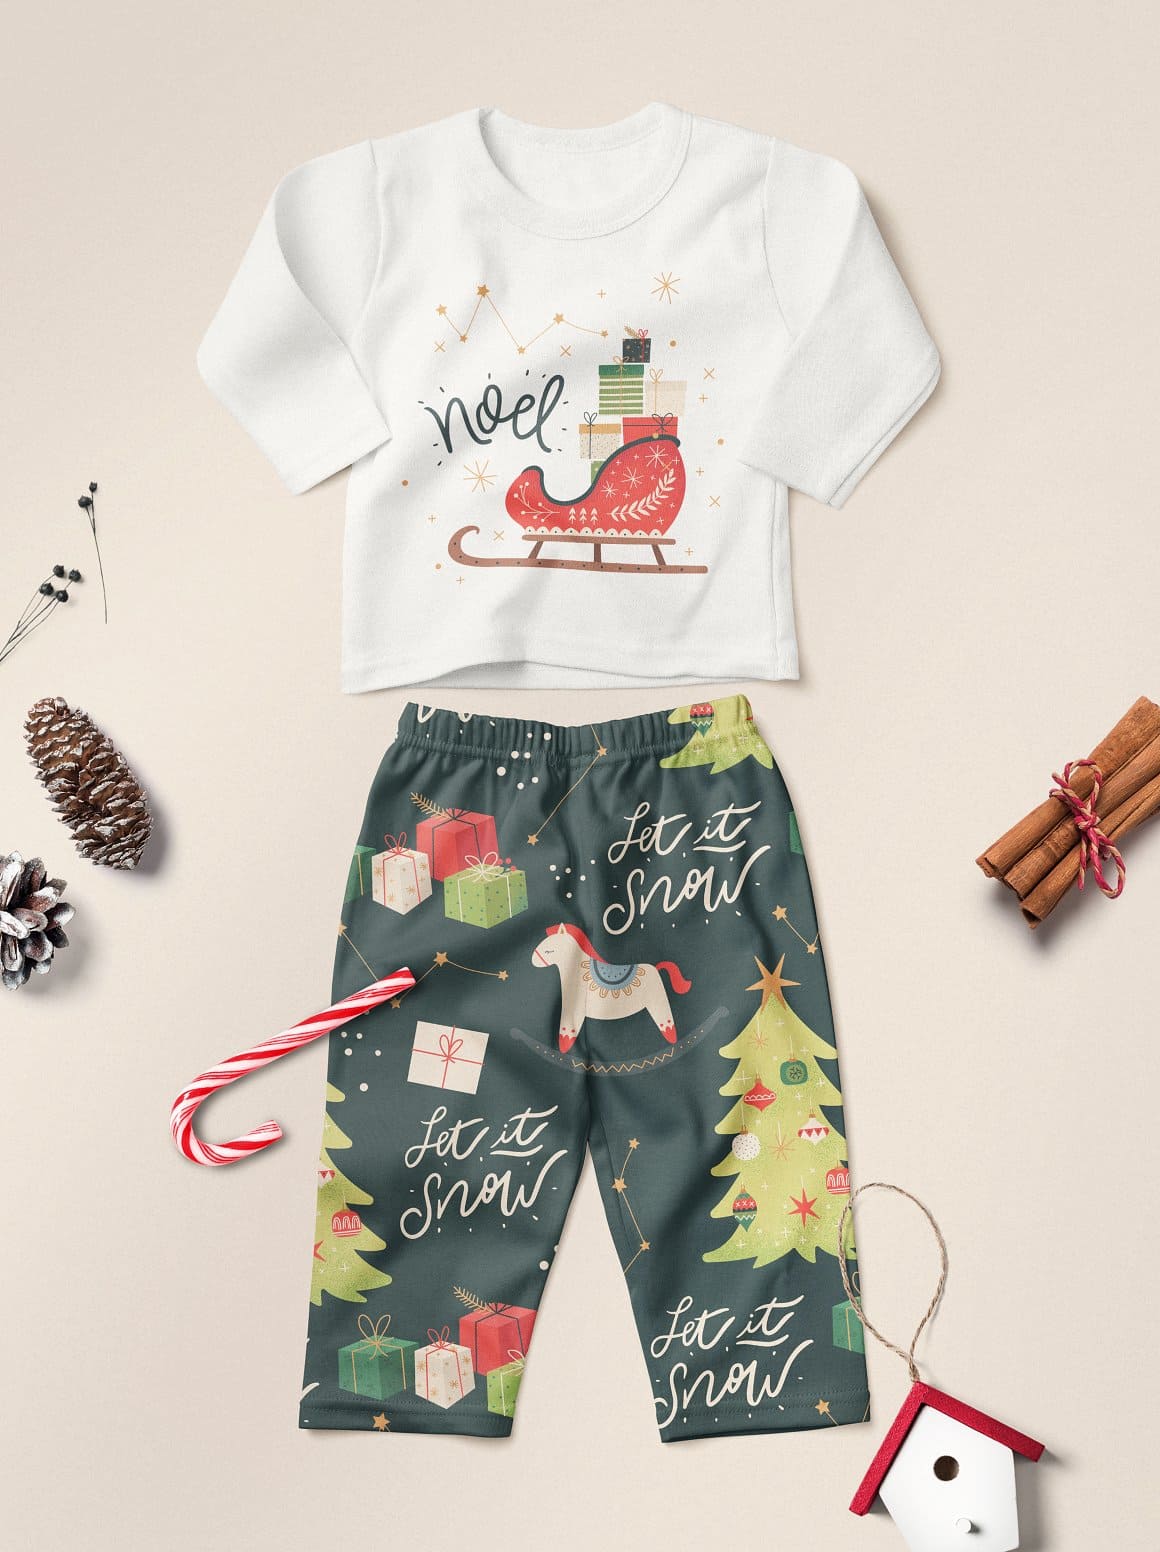 Children's clothes with Christmas pictures.